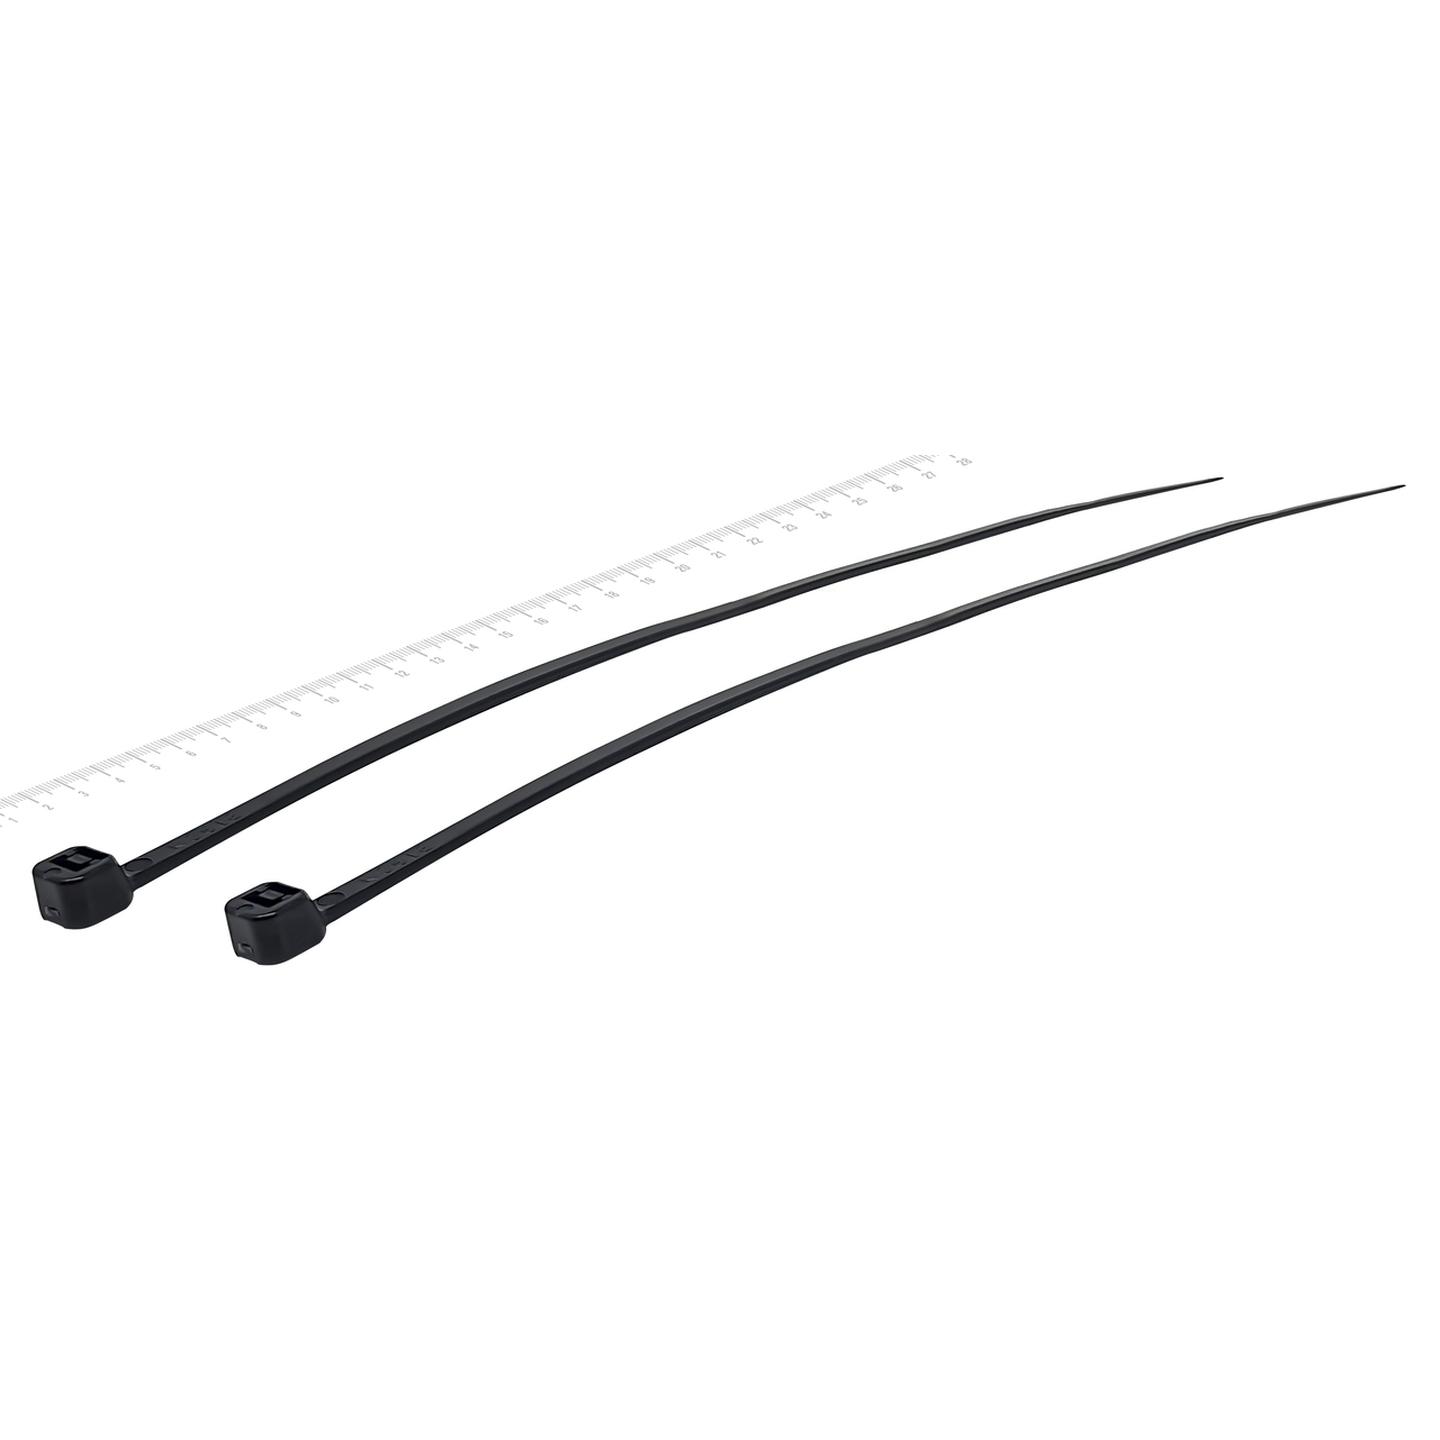 Cable Tie 300mm x 4.8mm pack of 500